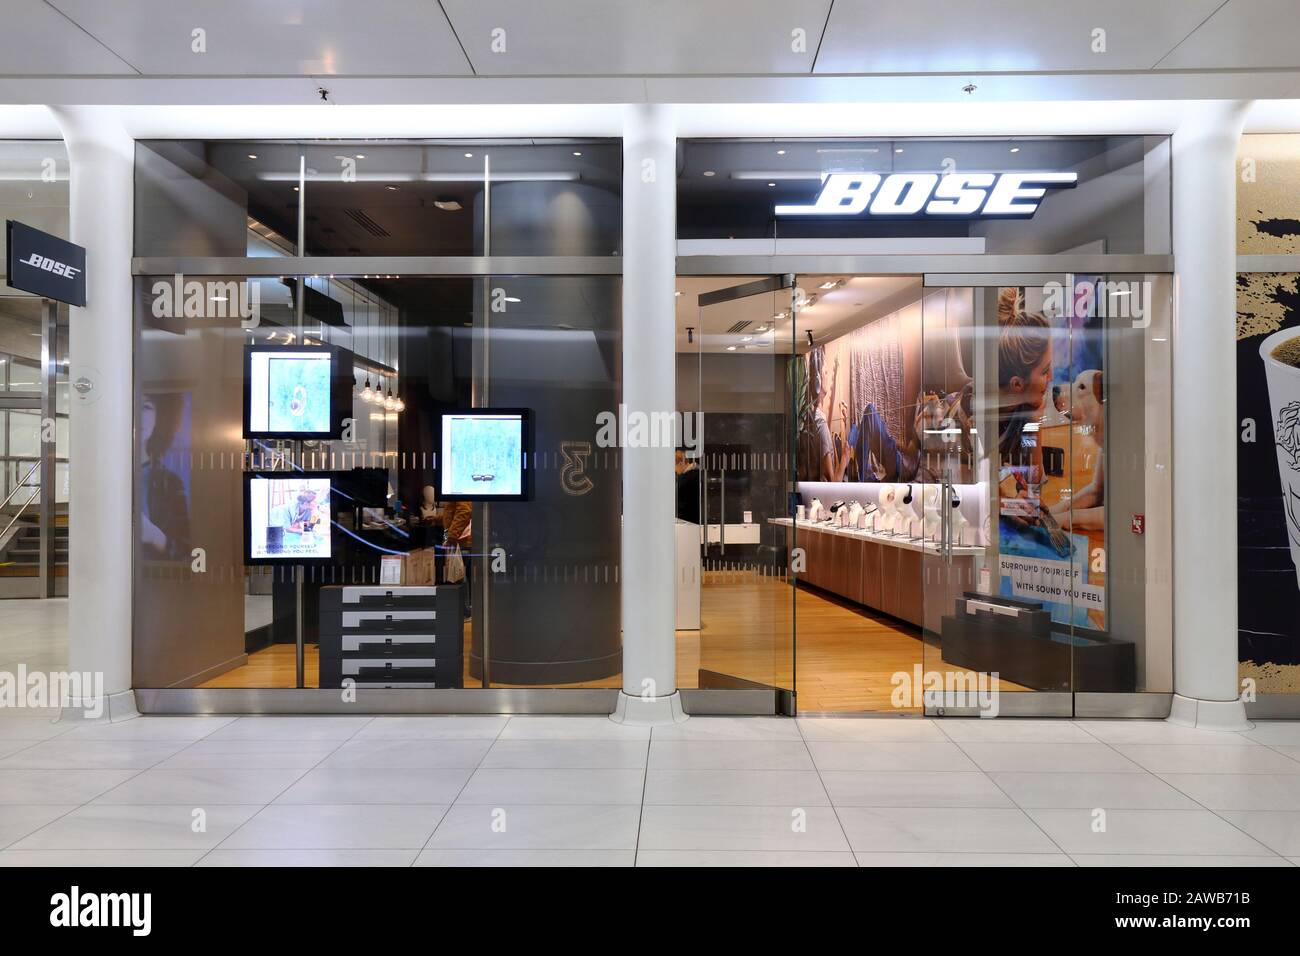 A Bose headphone and speaker store in the World Trade Center Oculus  shopping mall in New York, NY Stock Photo - Alamy